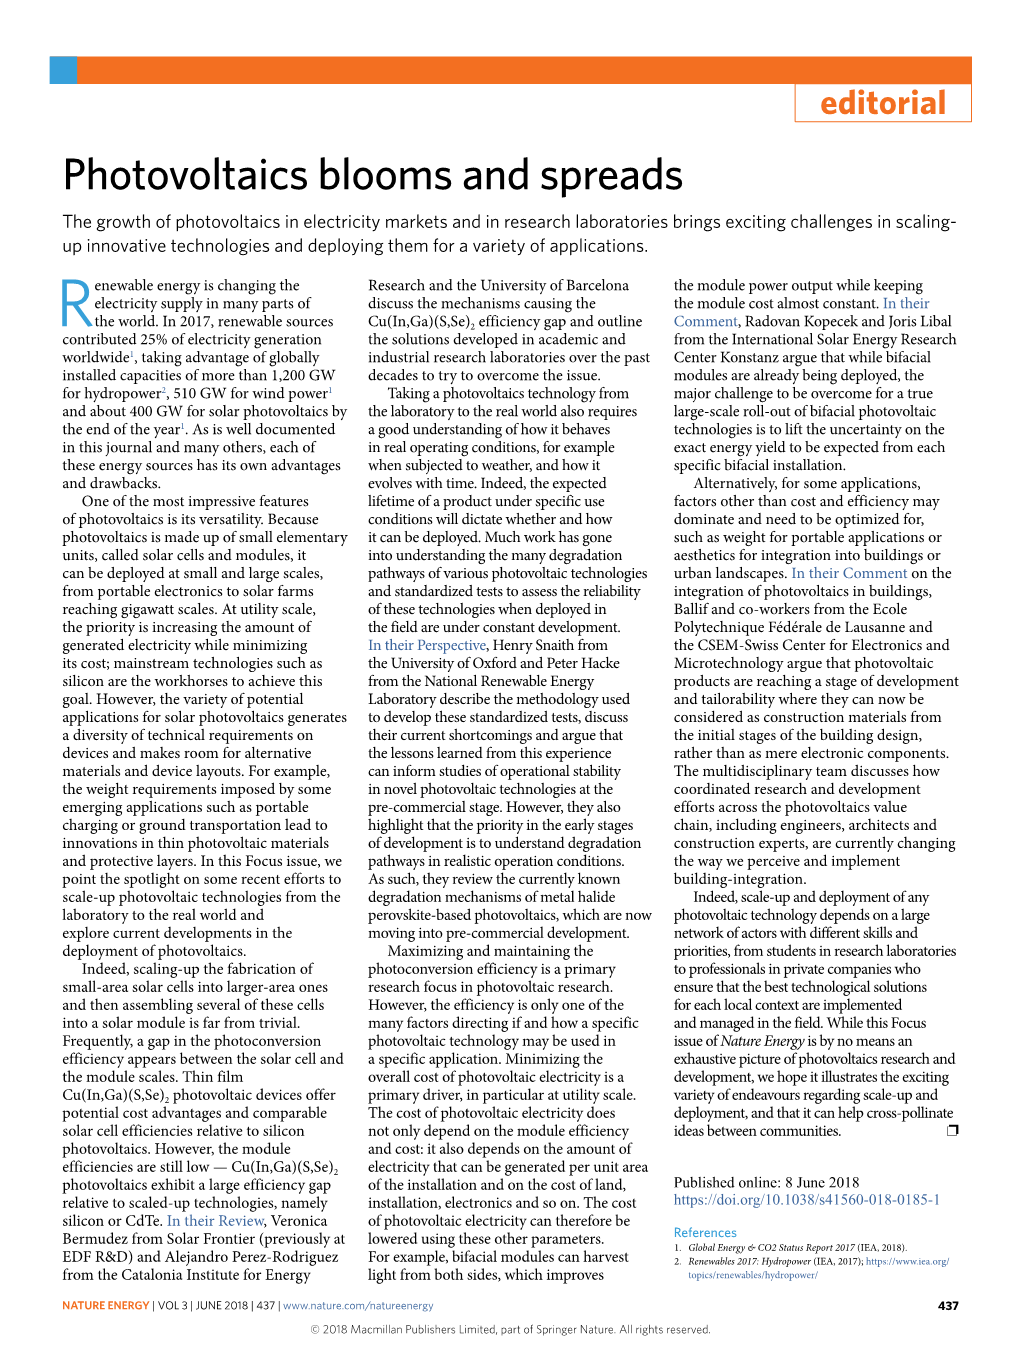 Photovoltaics Blooms and Spreads